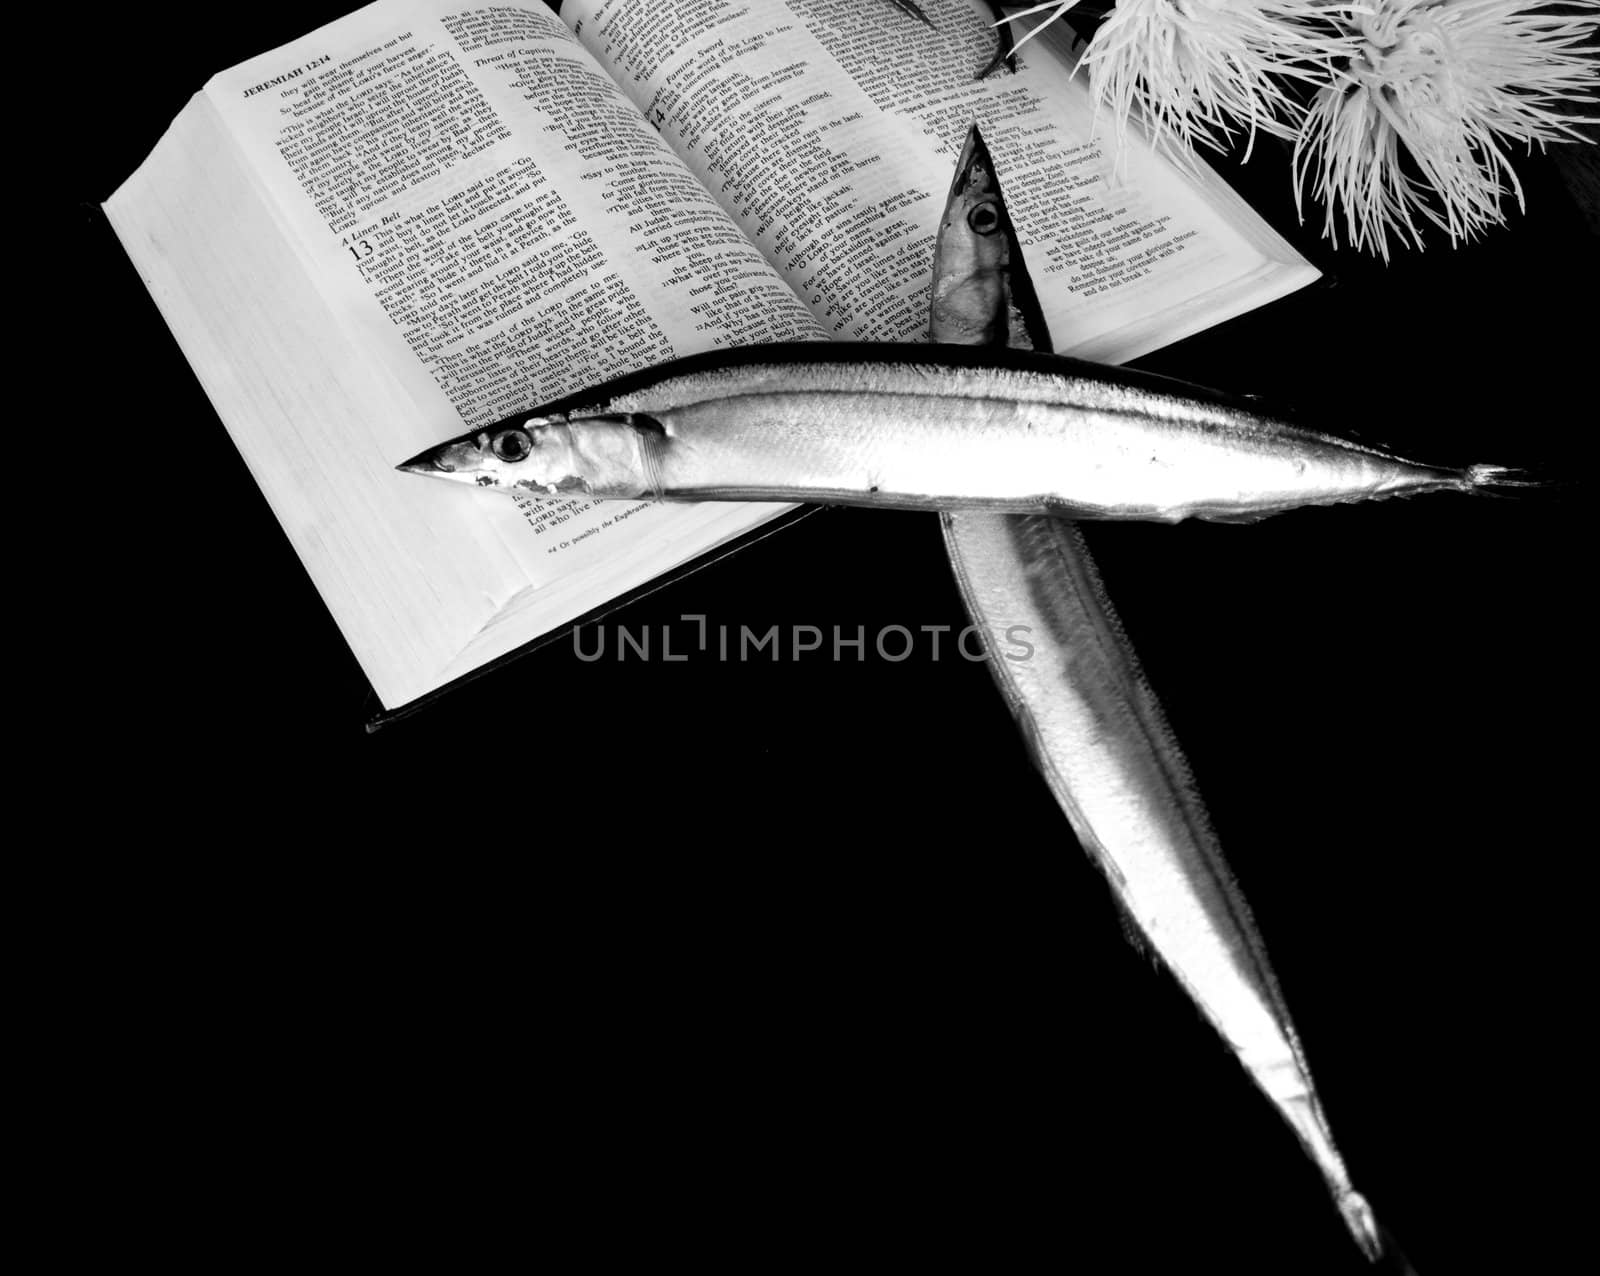 Conceptual image of two fish (Macarol) in the shape of a cross on a bible.